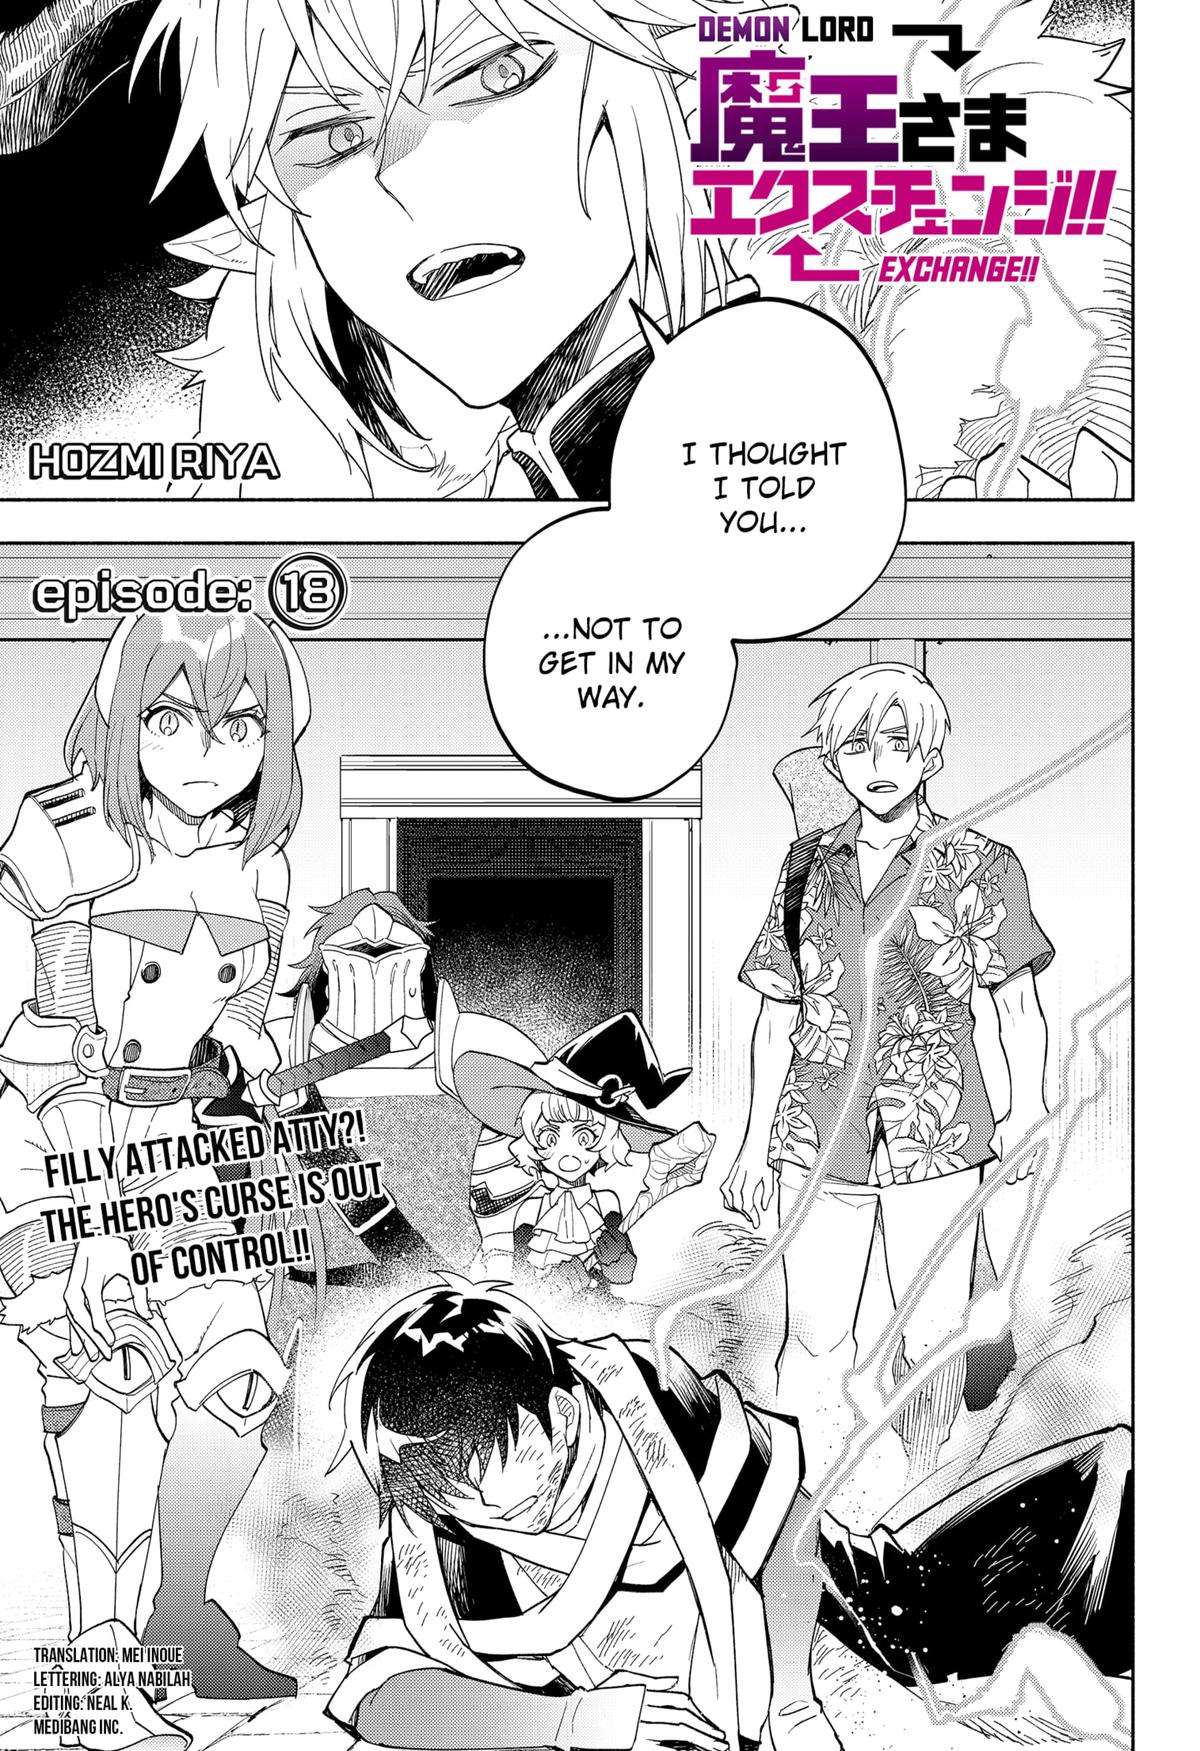 Demon Lord Exchange!! - chapter 18 - #1